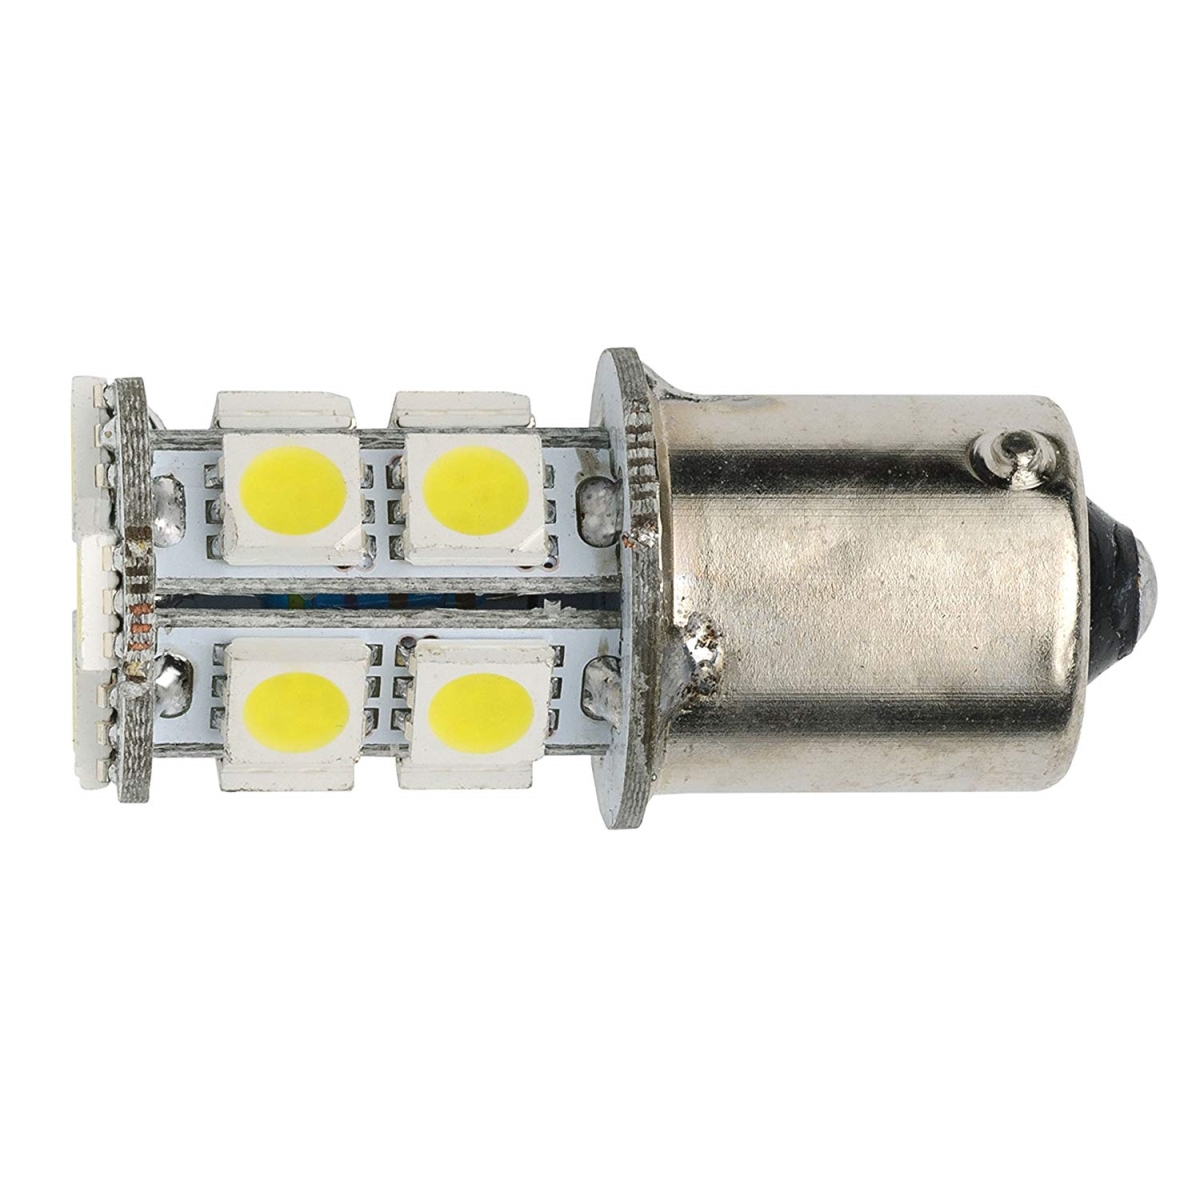 Picture of AP Products 0403.1334 016-7811156 Deluxe Socket Style LED Bulb - No.1156